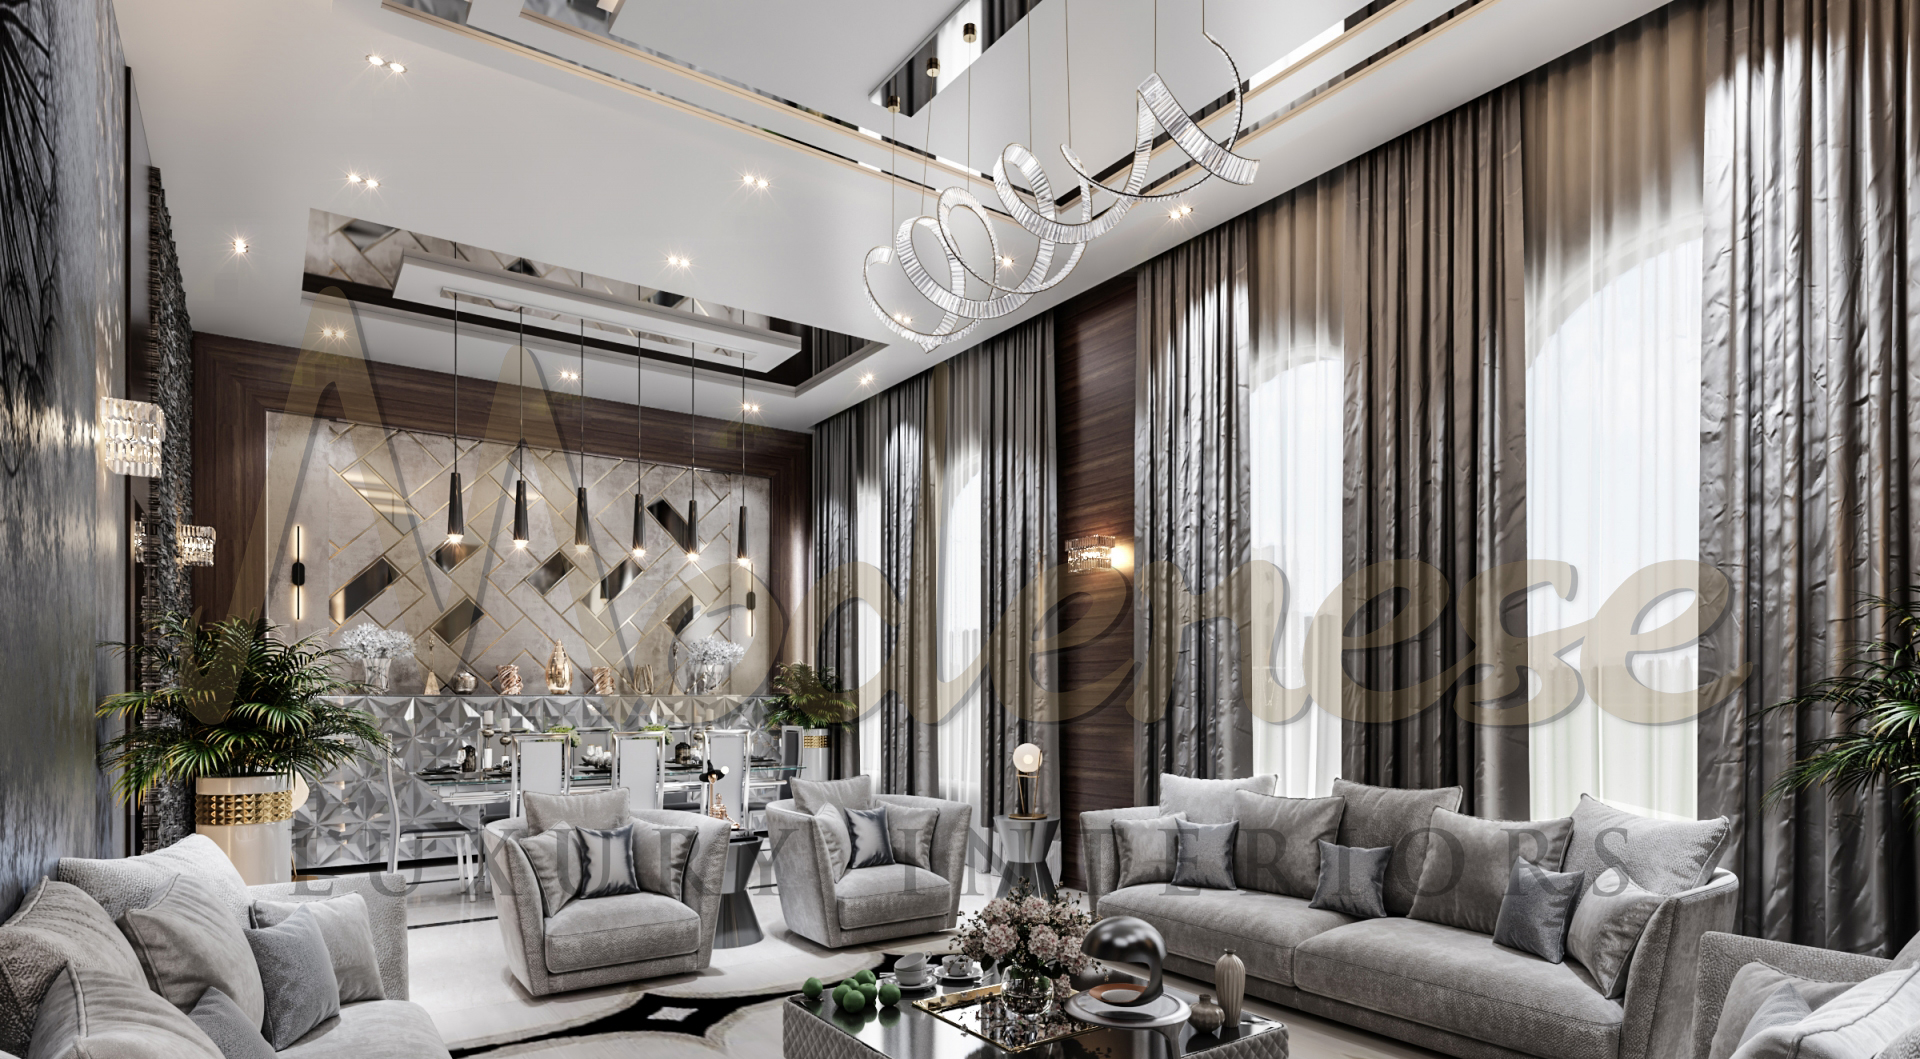 Turnkey Interior Design Project in Miami,USA. Luxury high-quality furniture made in Italy. Hand-made furniture for exclusive living room design.